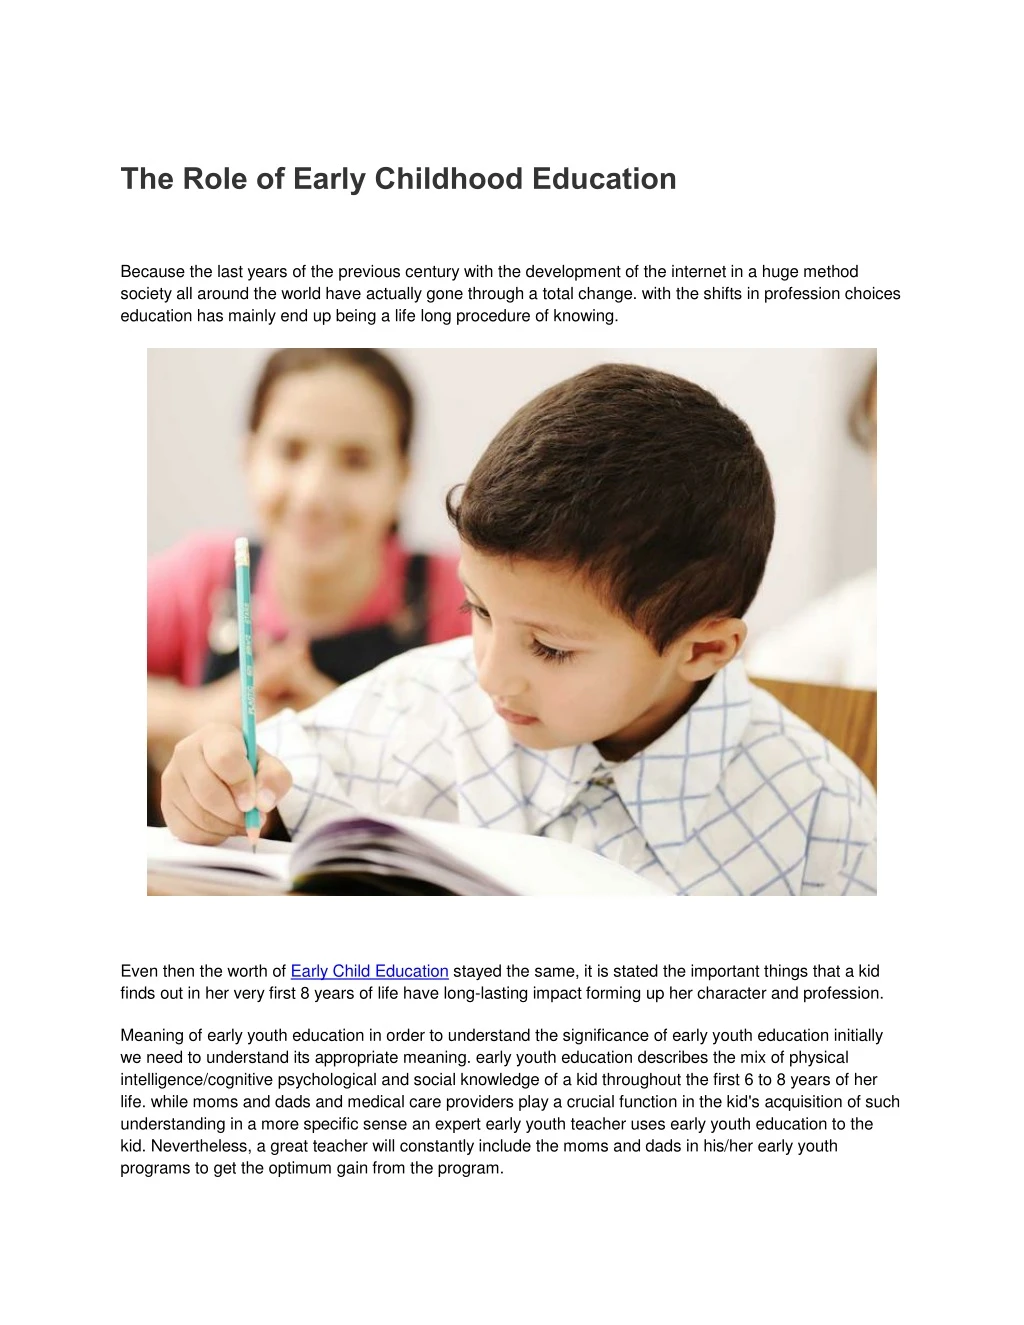 the role of early childhood education